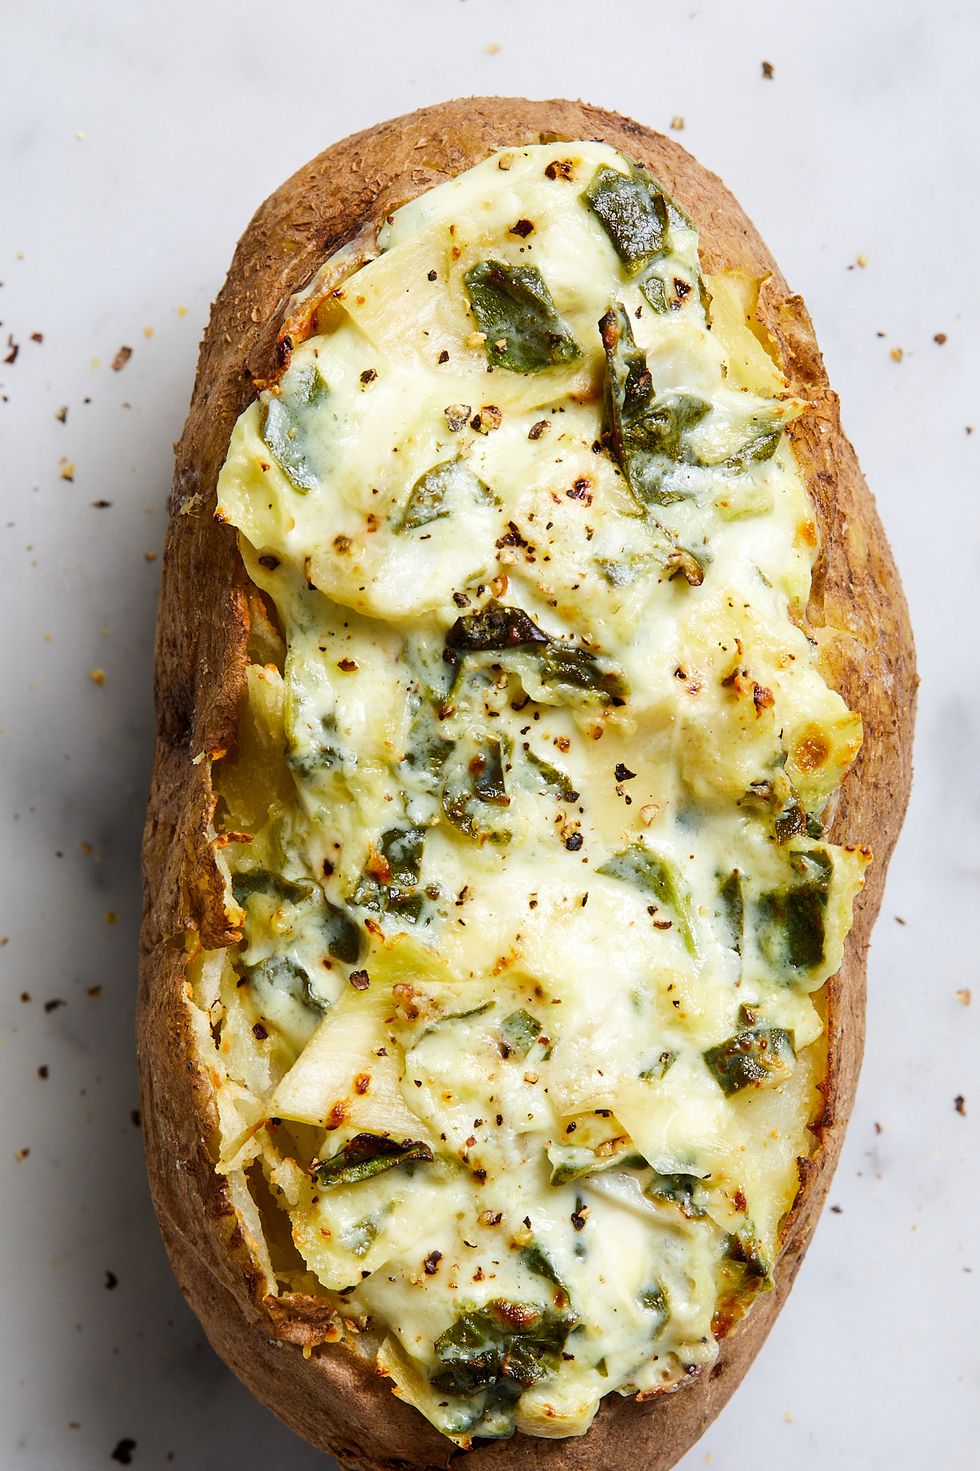 16 Upscale Potato Recipes for a Crowd Worthy of Your Next Party